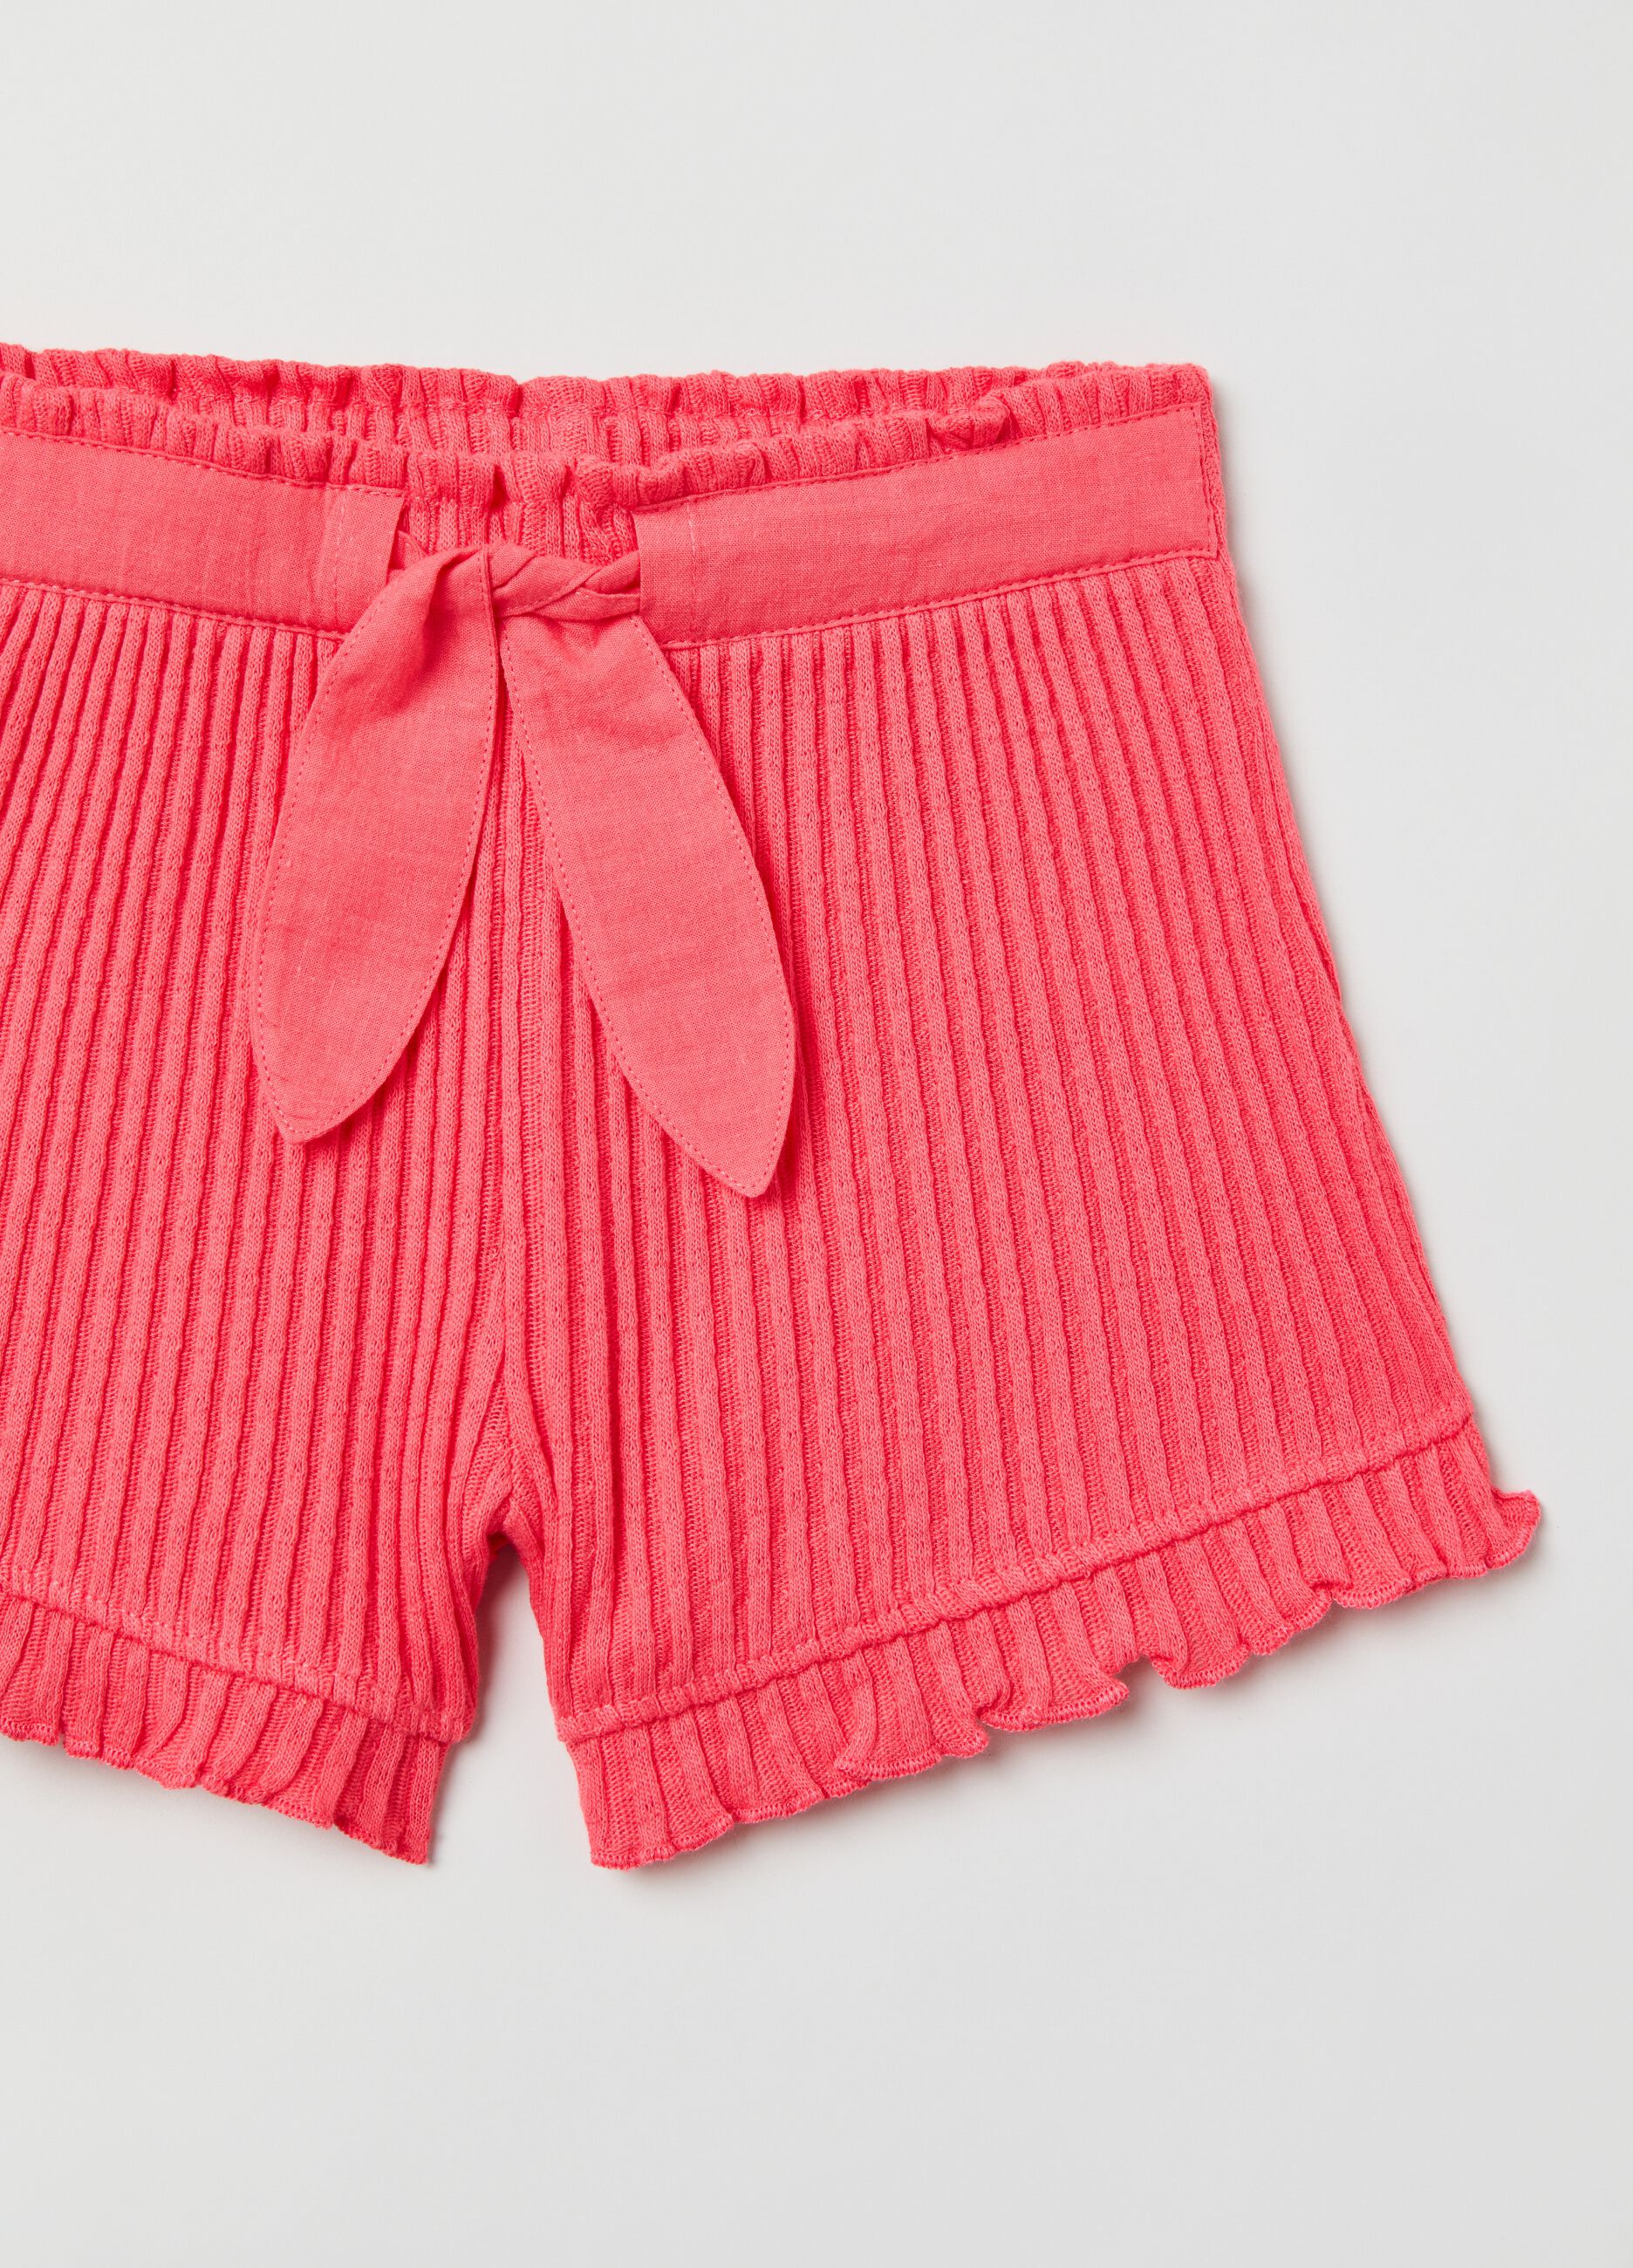 Shorts in textured fabric with ribbing